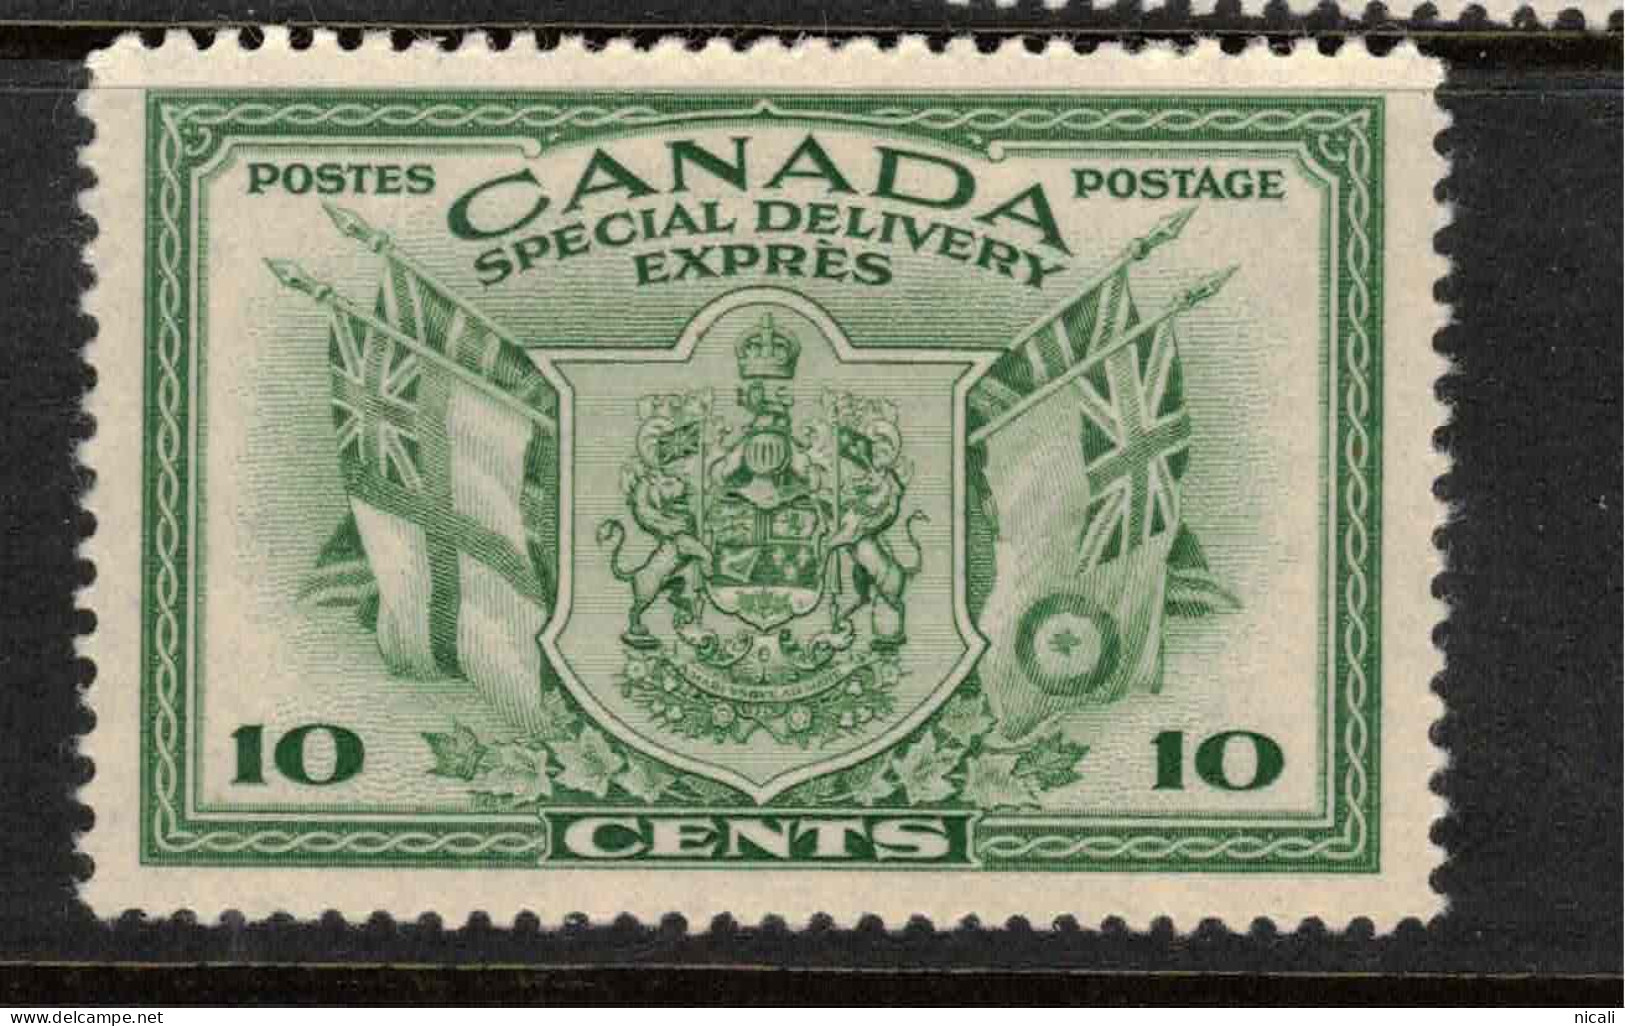 CANADA 1942 10c Special Delivery SG S12 HM ZZ82 - Luchtpost: Expres